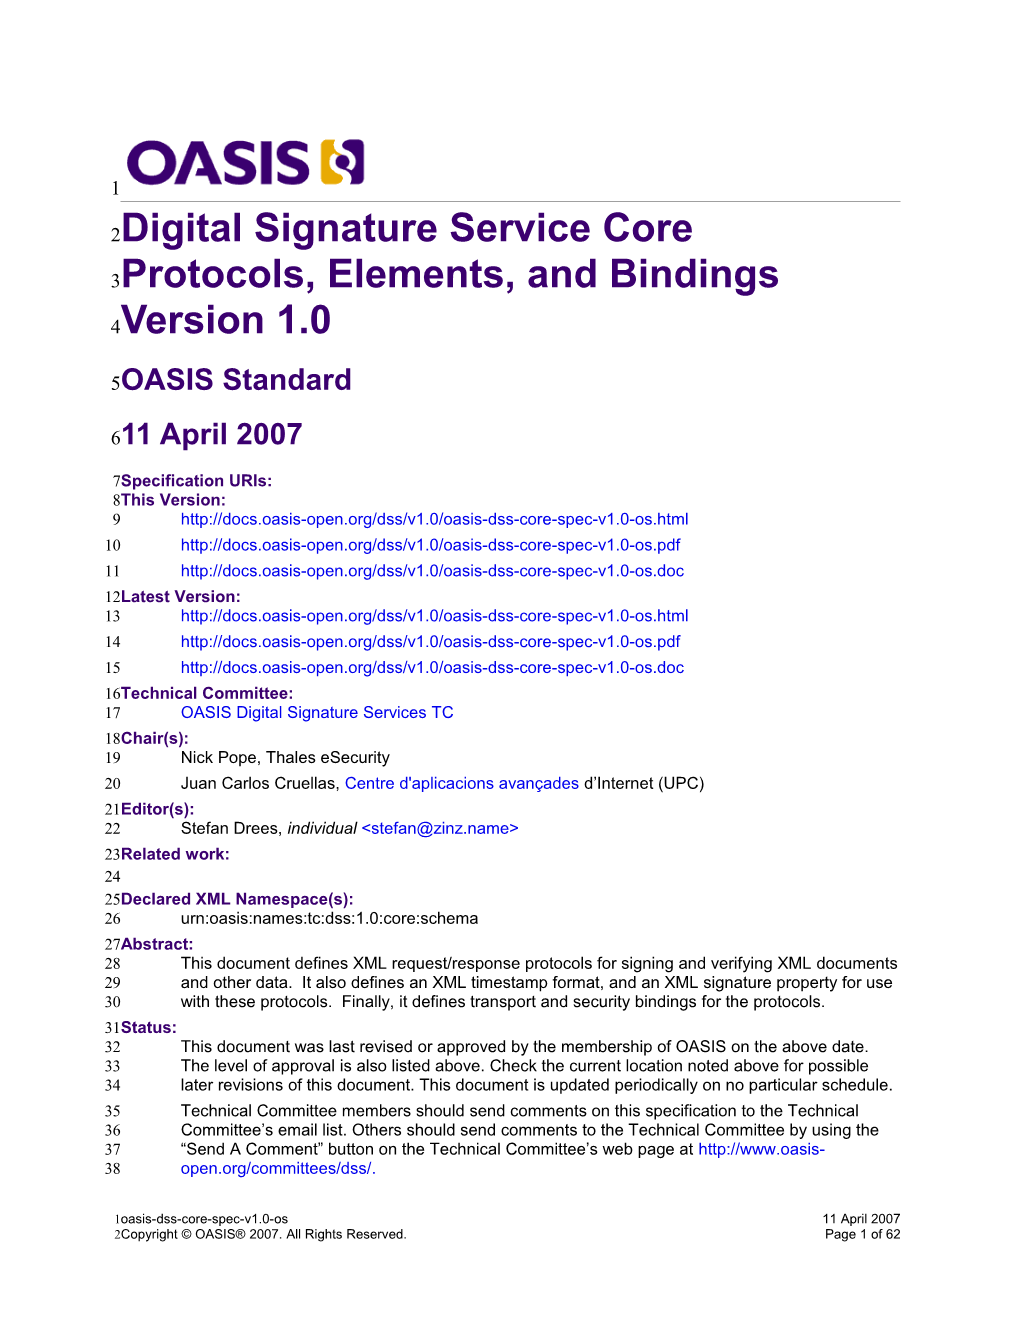 OASIS Digital Signature Service Core Protocols, Elements, and Bindings